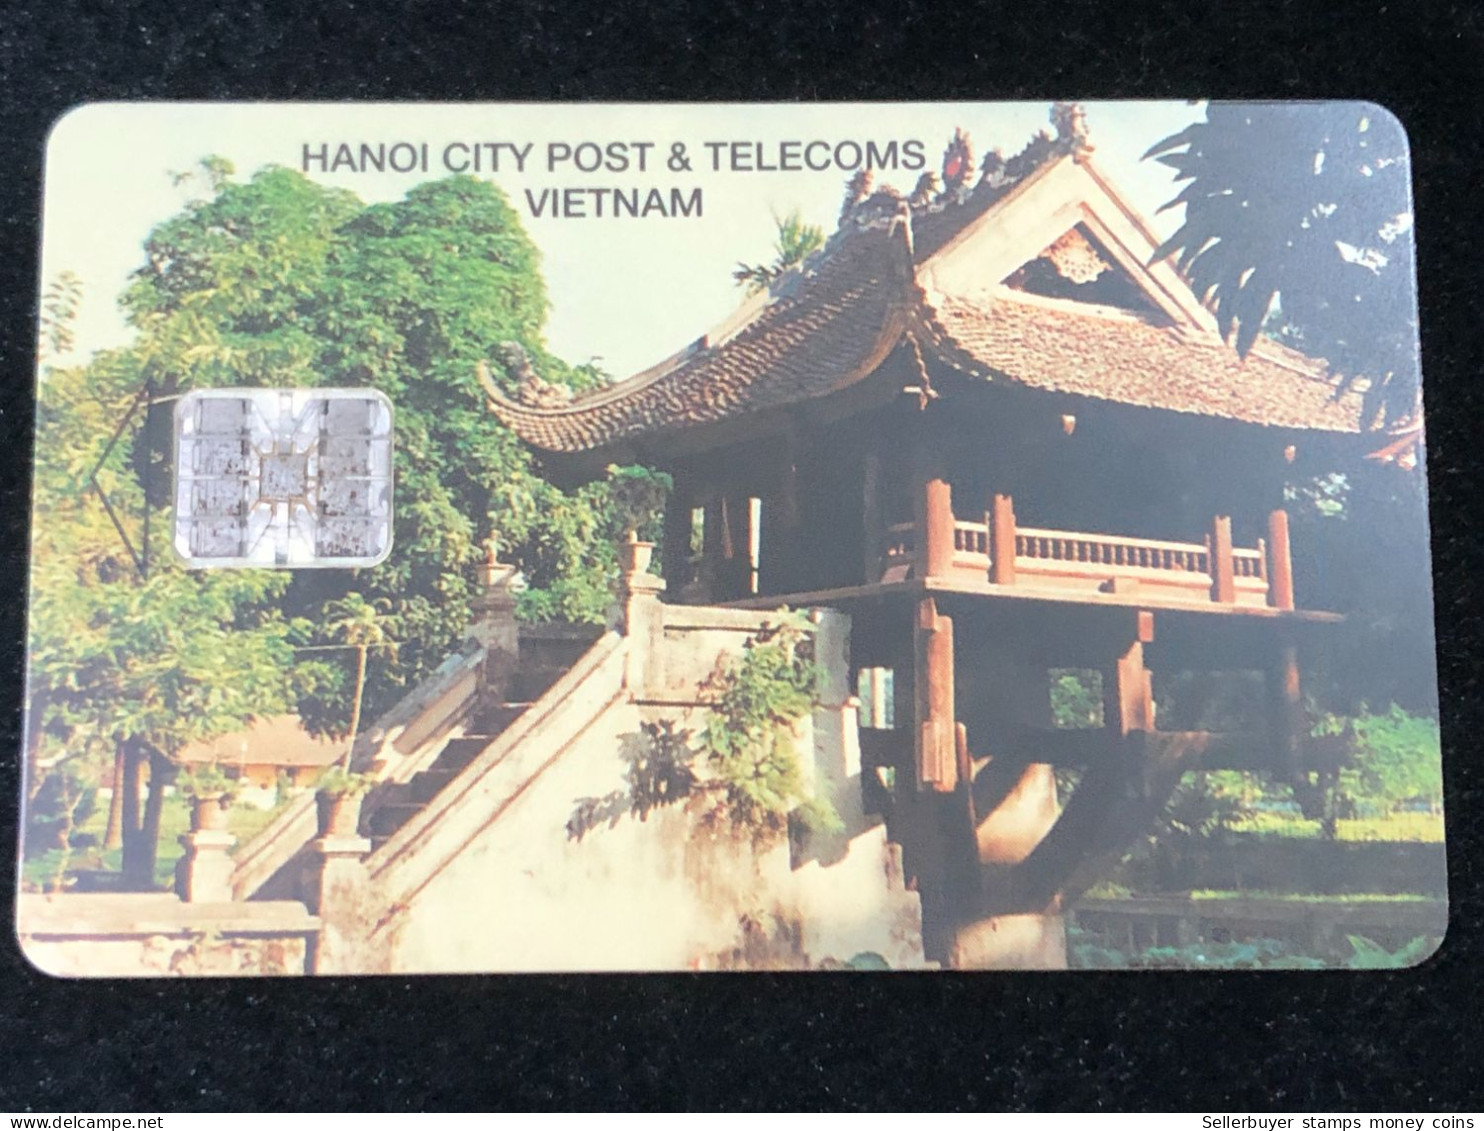 Vietnam This Is A Vietnamese Cardphone Card From 2001 And 2005(chua Mot Cot- 40 000dong Not Released Rare)-1pcs - Vietnam